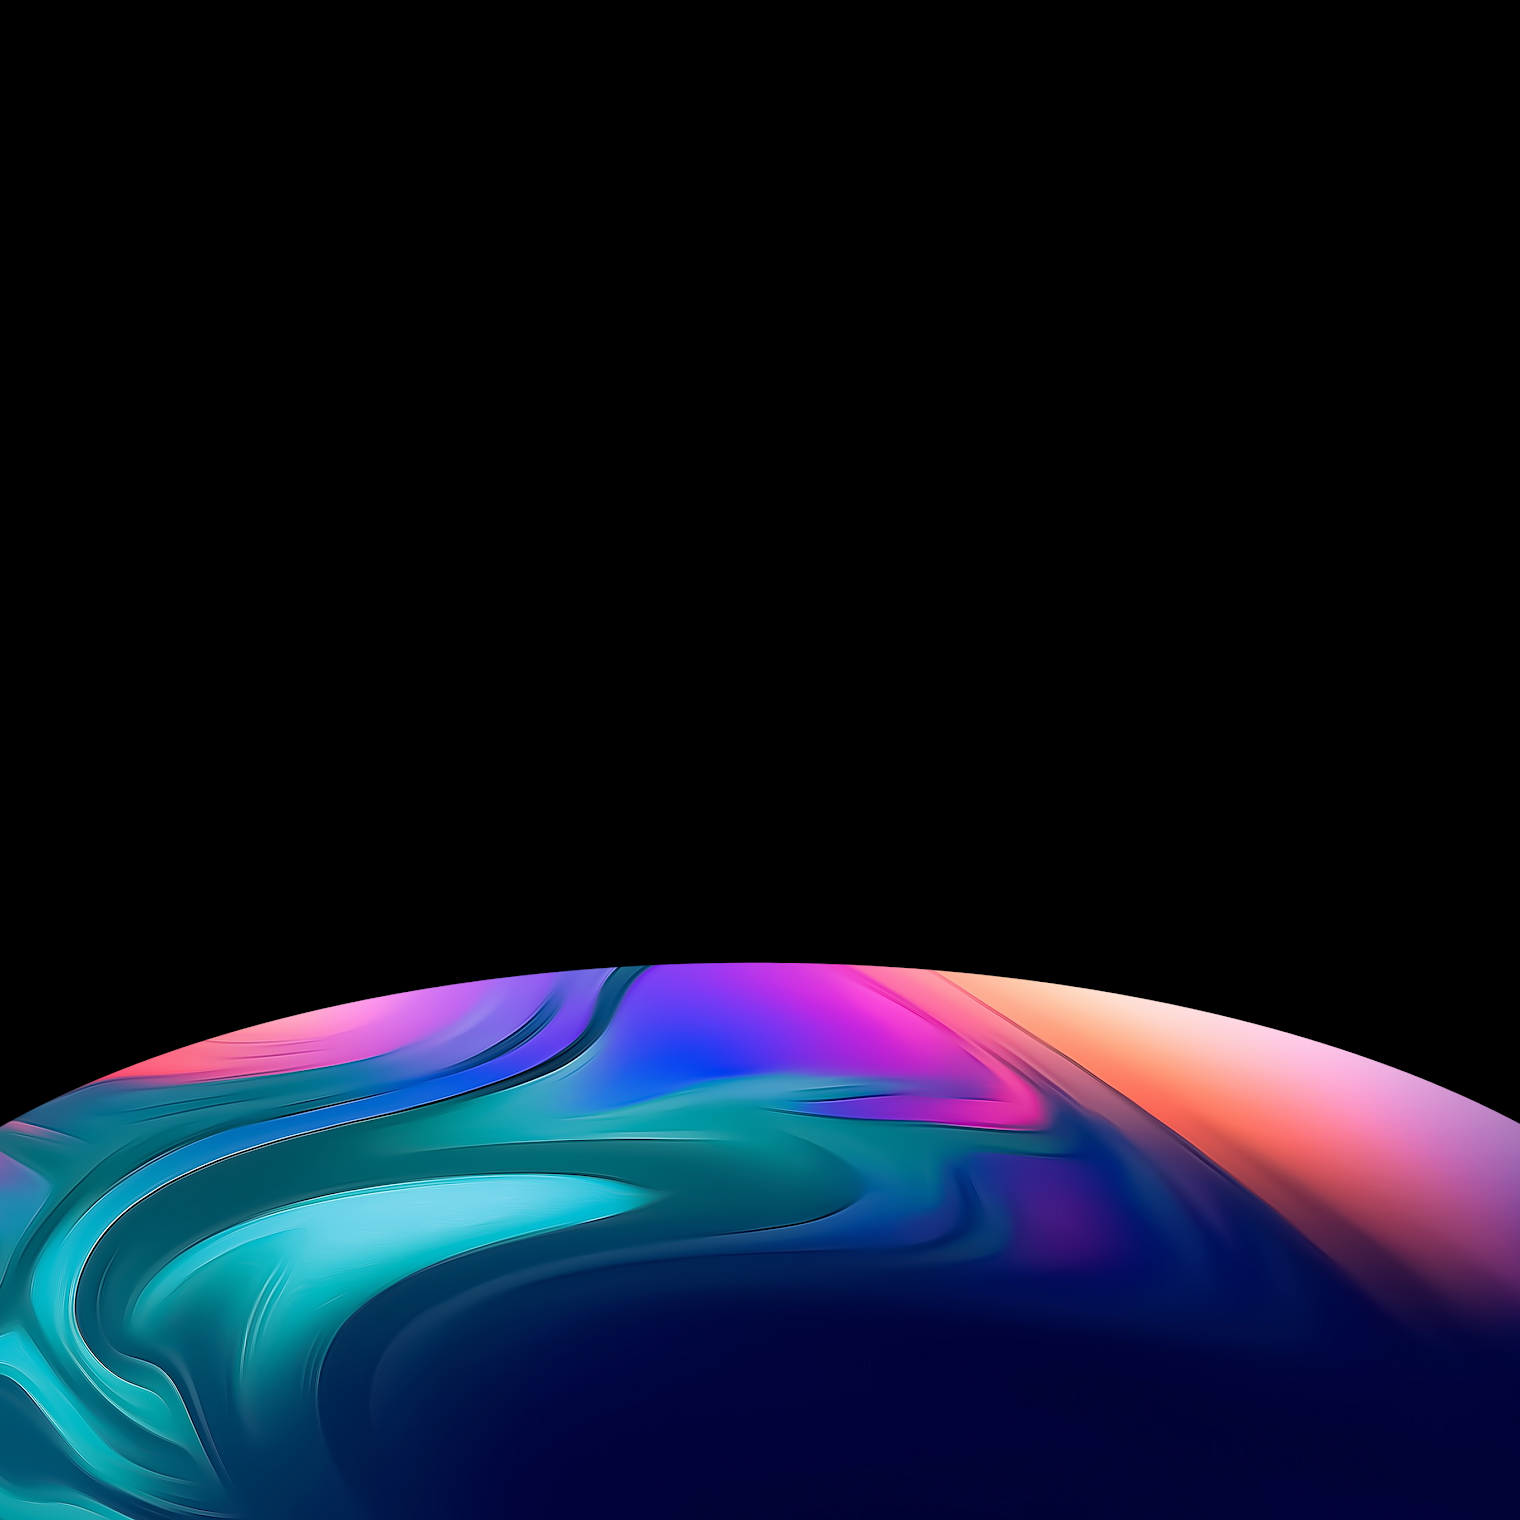 all iphone wallpapers,blue,light,water,purple,atmosphere